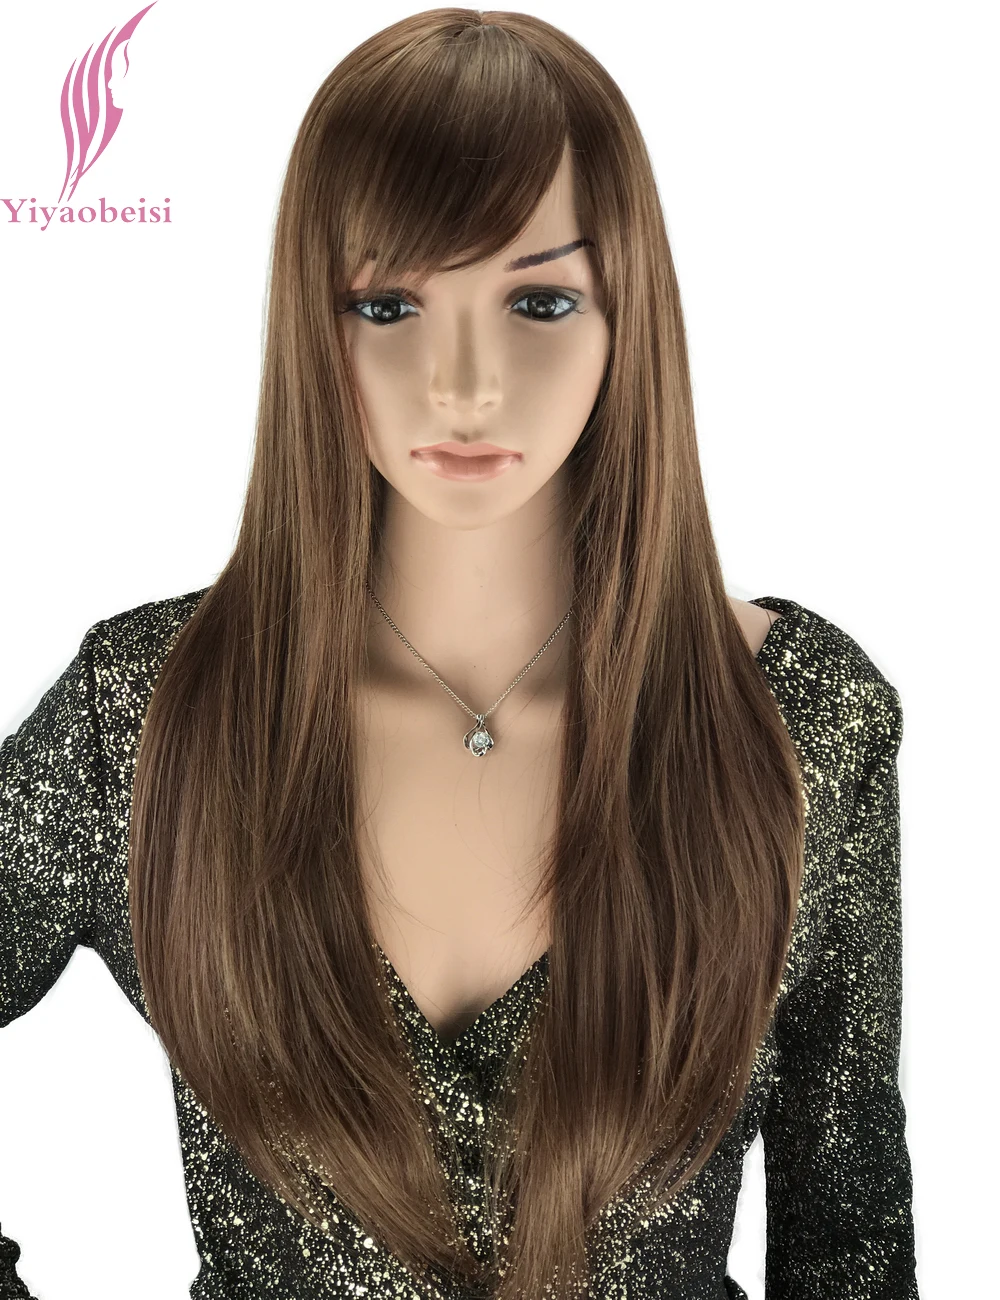 Yiyaobess 24inch Synthetic Highlights Bright Brown Long Straight Wig